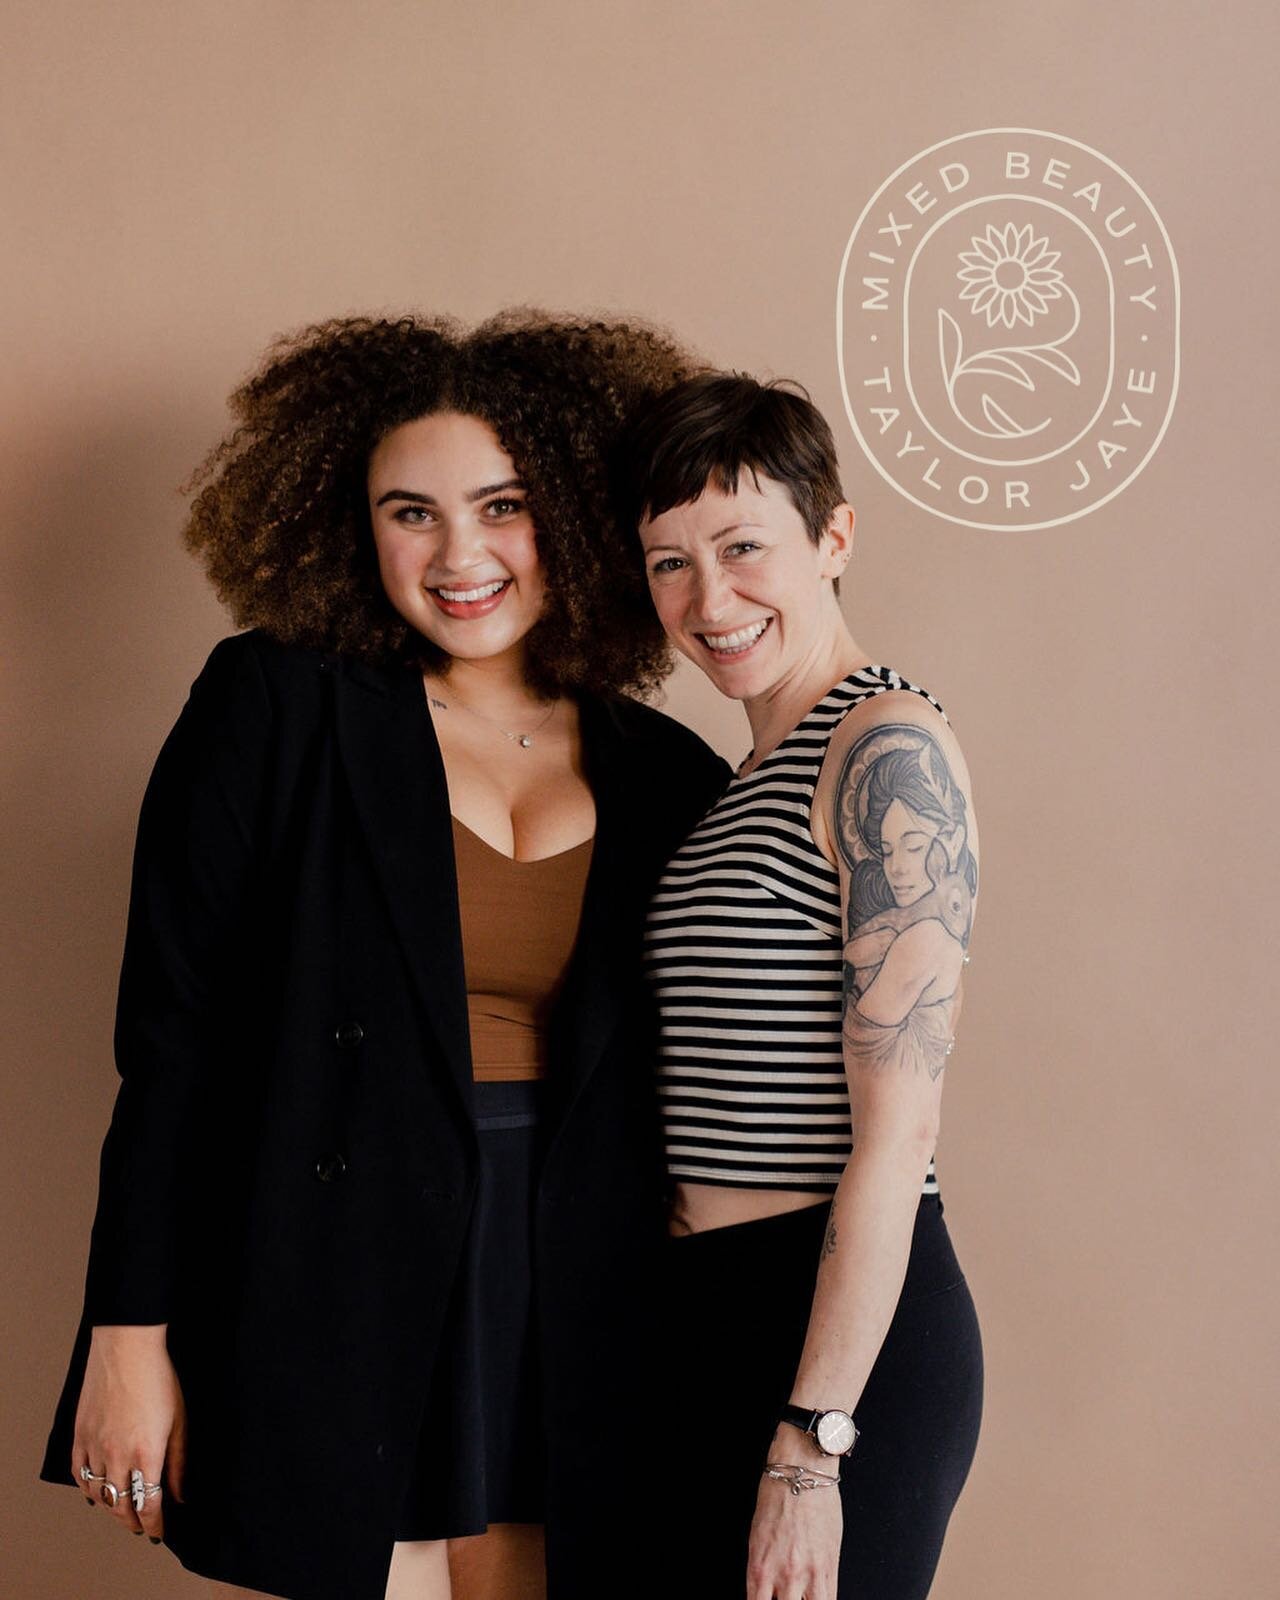 Hello! We are the faces of Mixed Beauty! 👋🏼 Mixed Beauty is the obvious choice to emphasize and enhance your natural beauty; not distract from it. We love that our work helps our clients feel confident and beautiful exactly as they are without feel